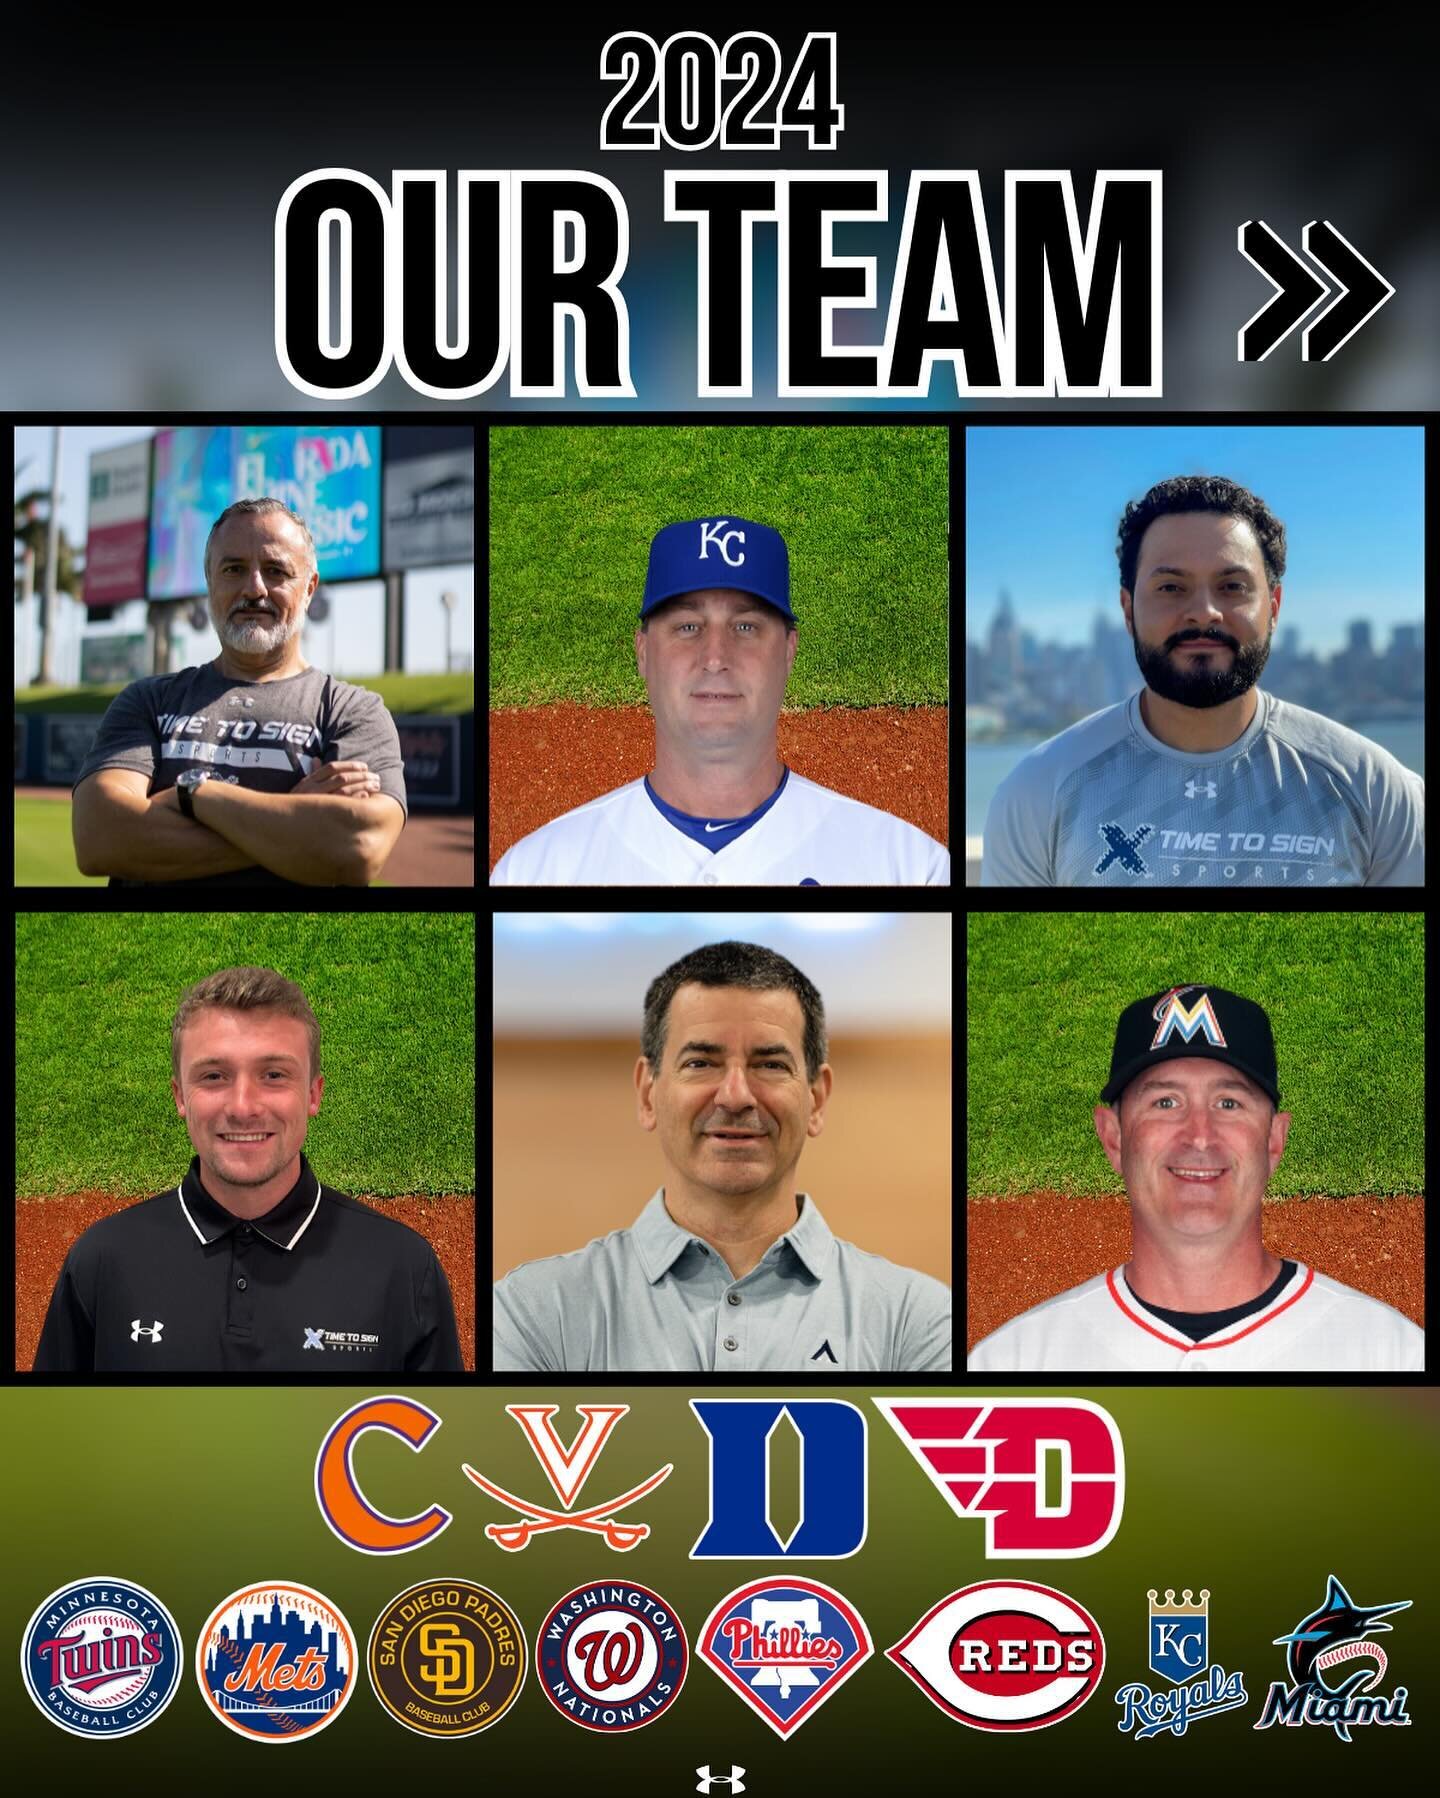 🚨 Meet Our First Class Staff 🚨 

💥 Recruiting
💥 Physical Development
💥 Skill Development
💥 Mentorship
💥 College Preparation

College coaches actively recruit your support system. Maximize your ability, elevate your game, and uncover all of you